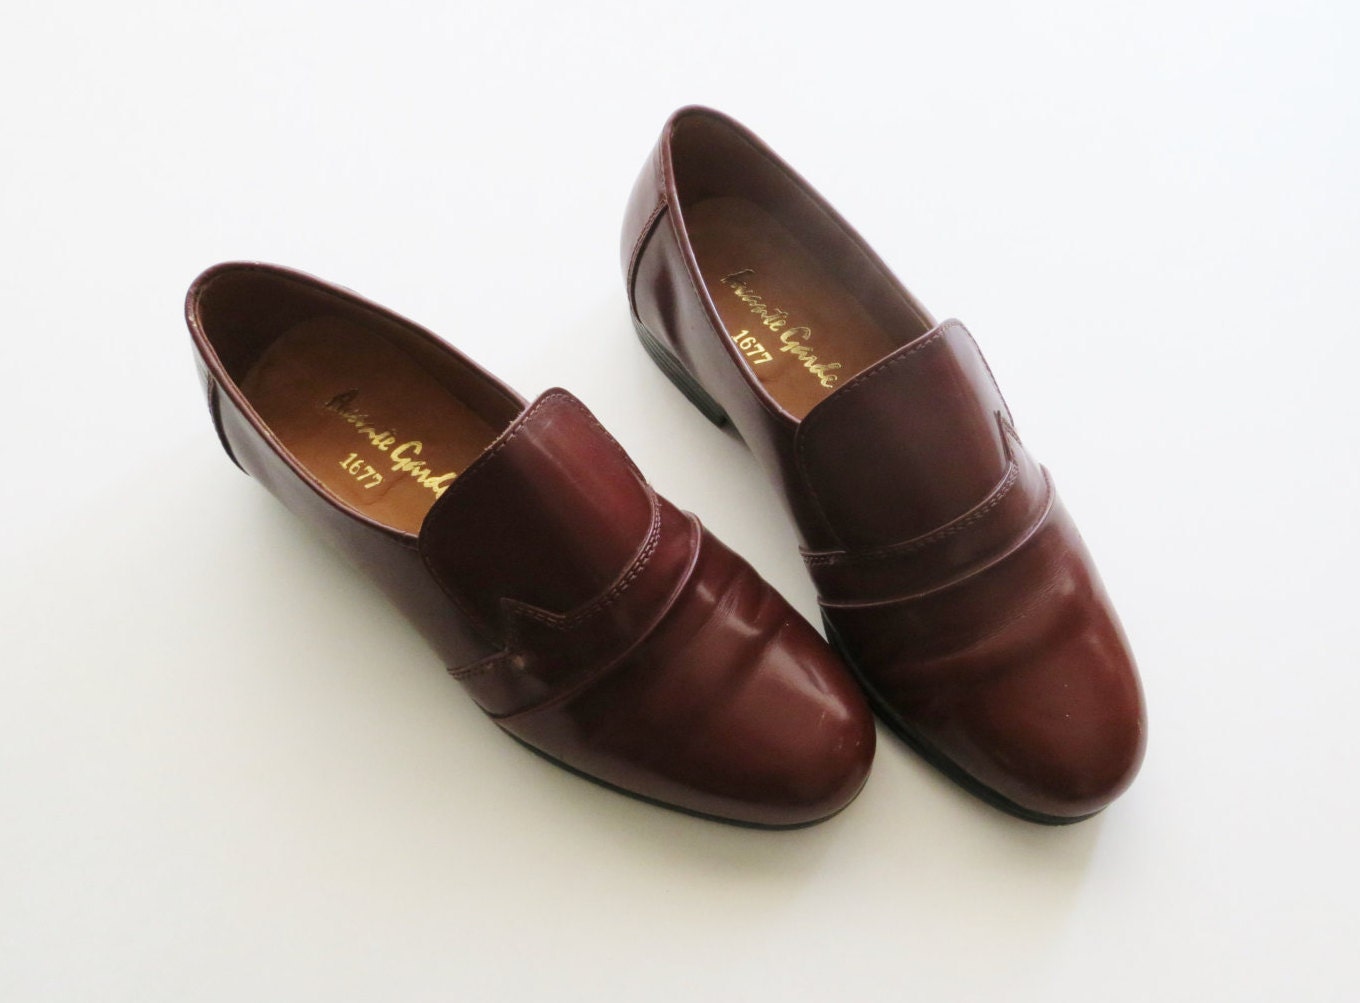 80s Oxblood Slip On Loafers Maroon Brown Mocha Oxfords Brogues